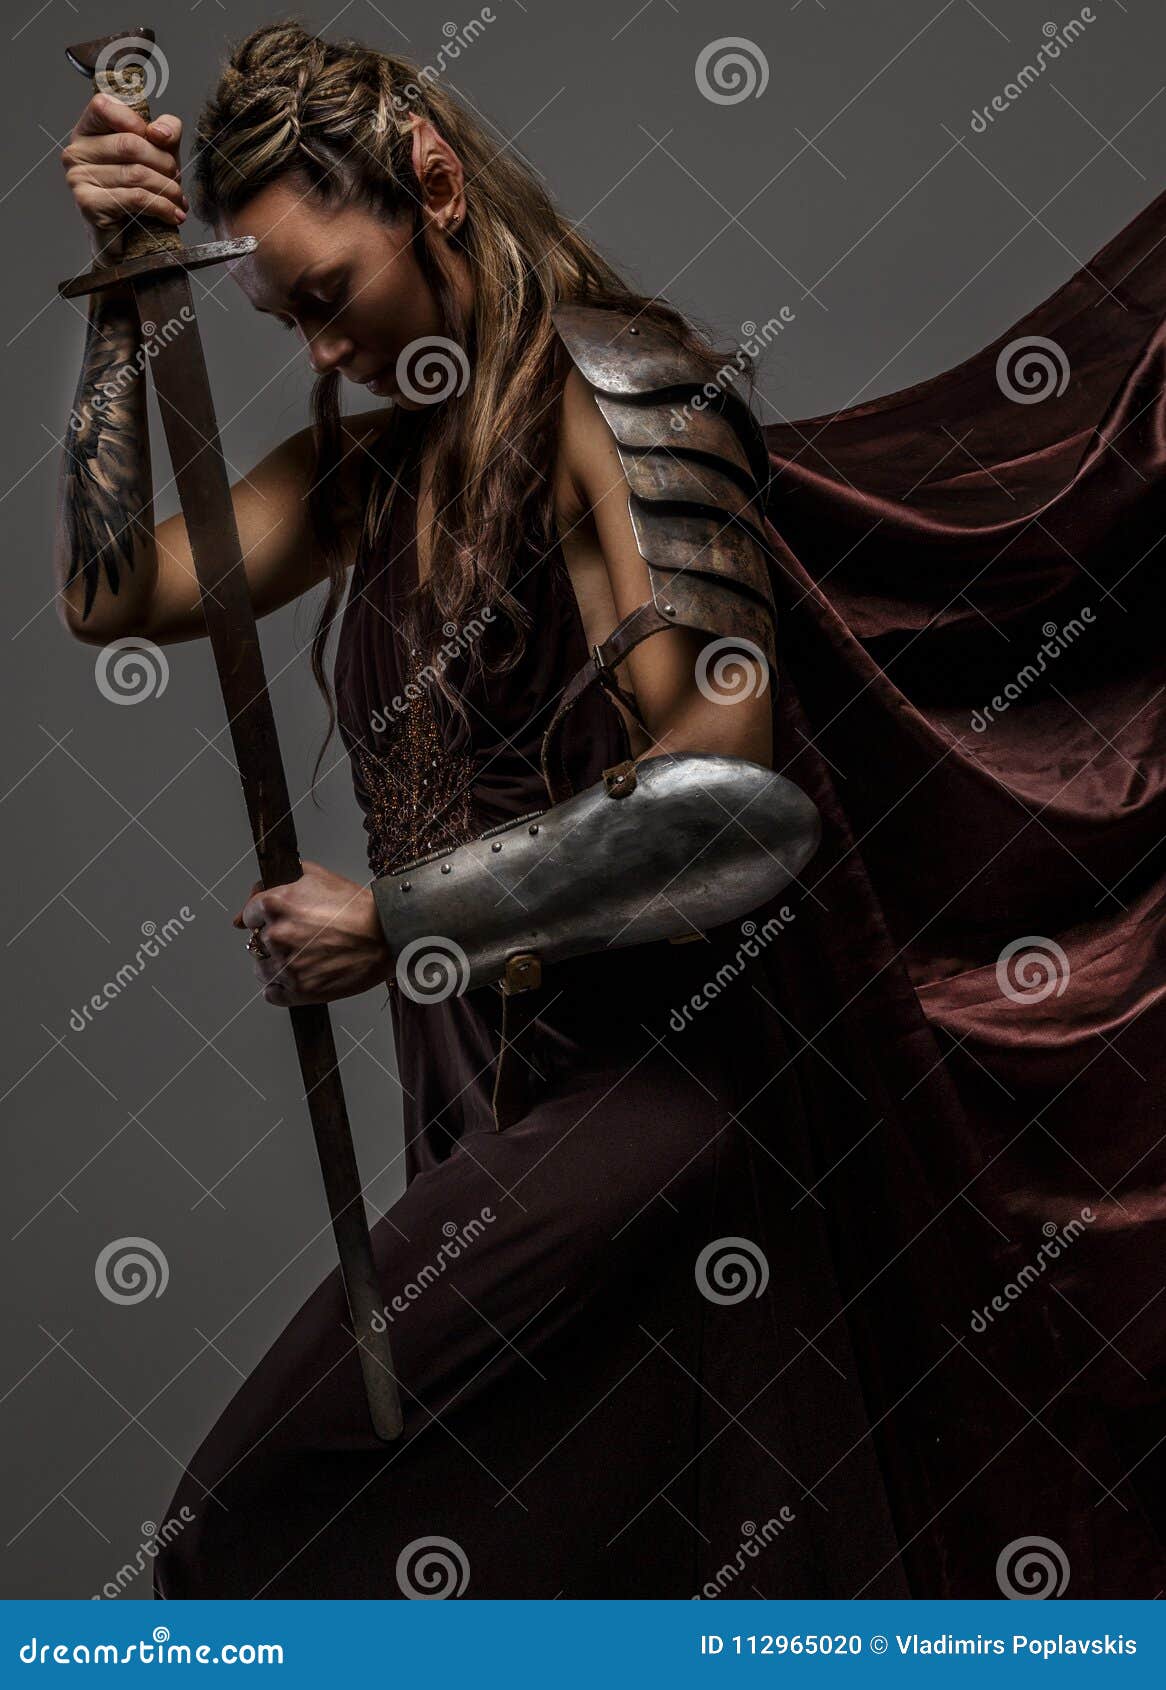 Girl Sword Leather Stock Photos and Pictures - 4,356 Images | Shutterstock